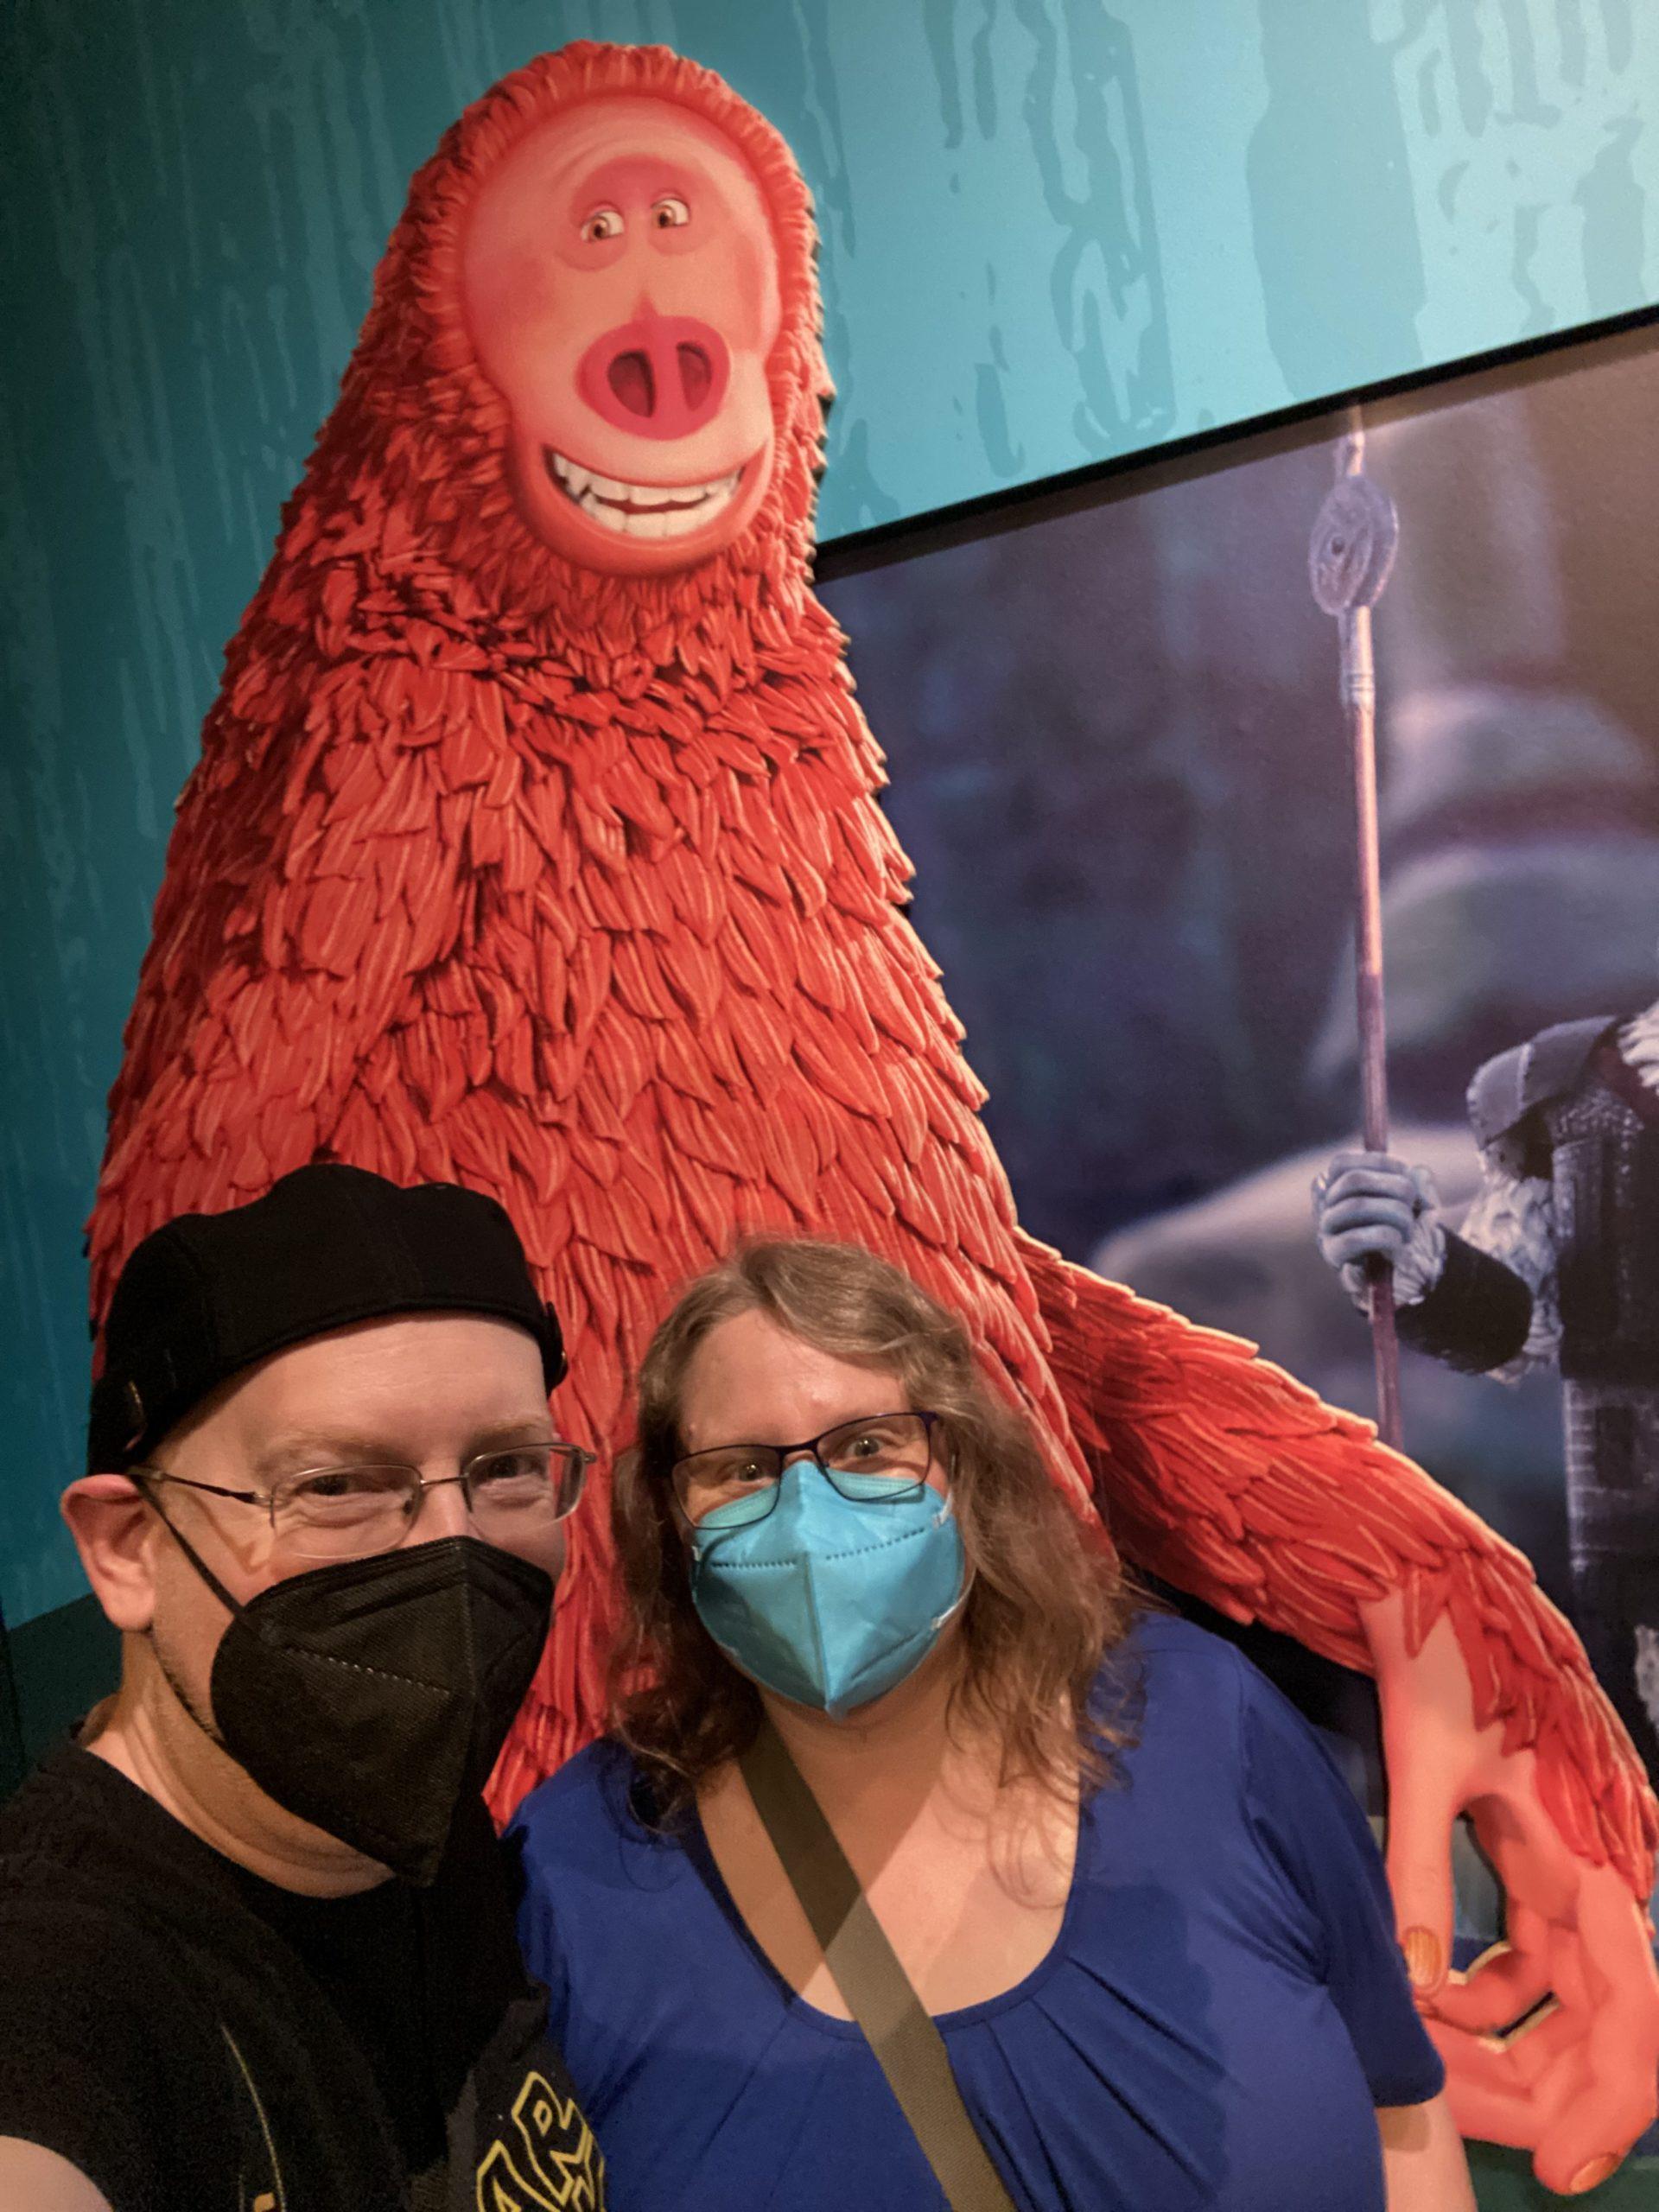 My wife and I in front of an image of the Bigfoot Mr. Link character from the Laika film Missing Link. We are standing so that it looks like Mr. Link has his arm around my wife's shoulders.